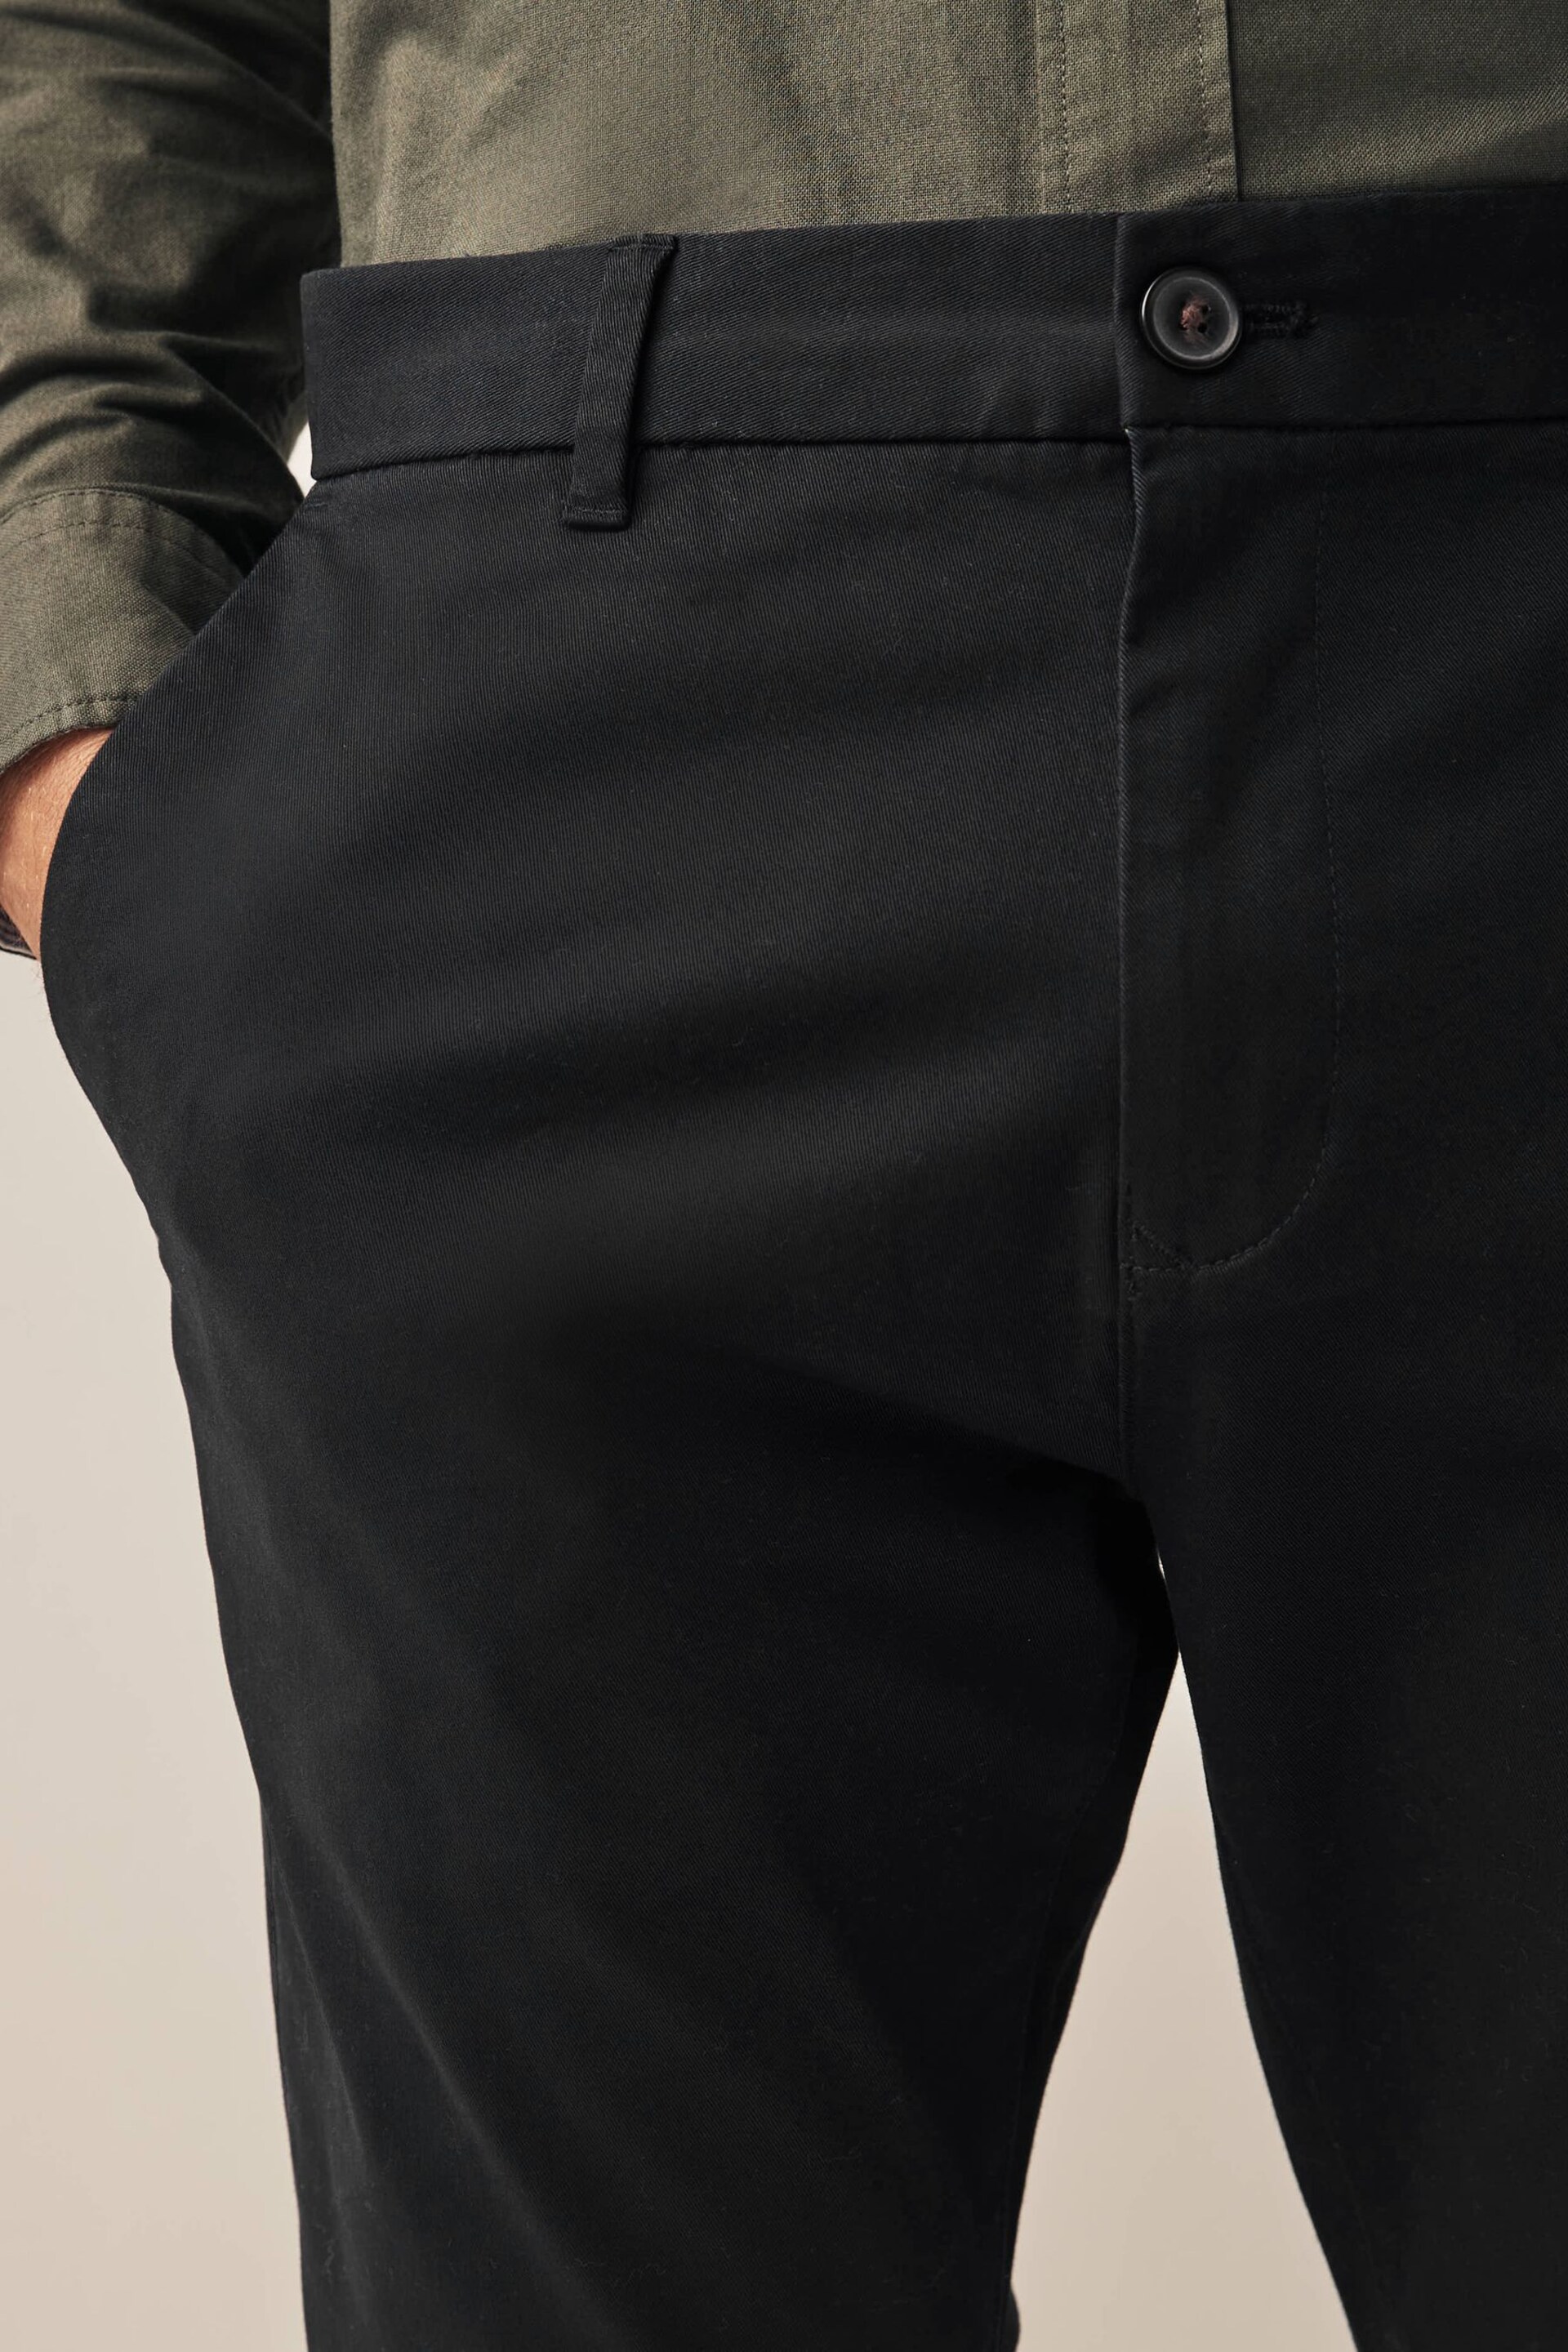 Black Skinny Stretch Chino Trousers 2 Pack - Image 6 of 9